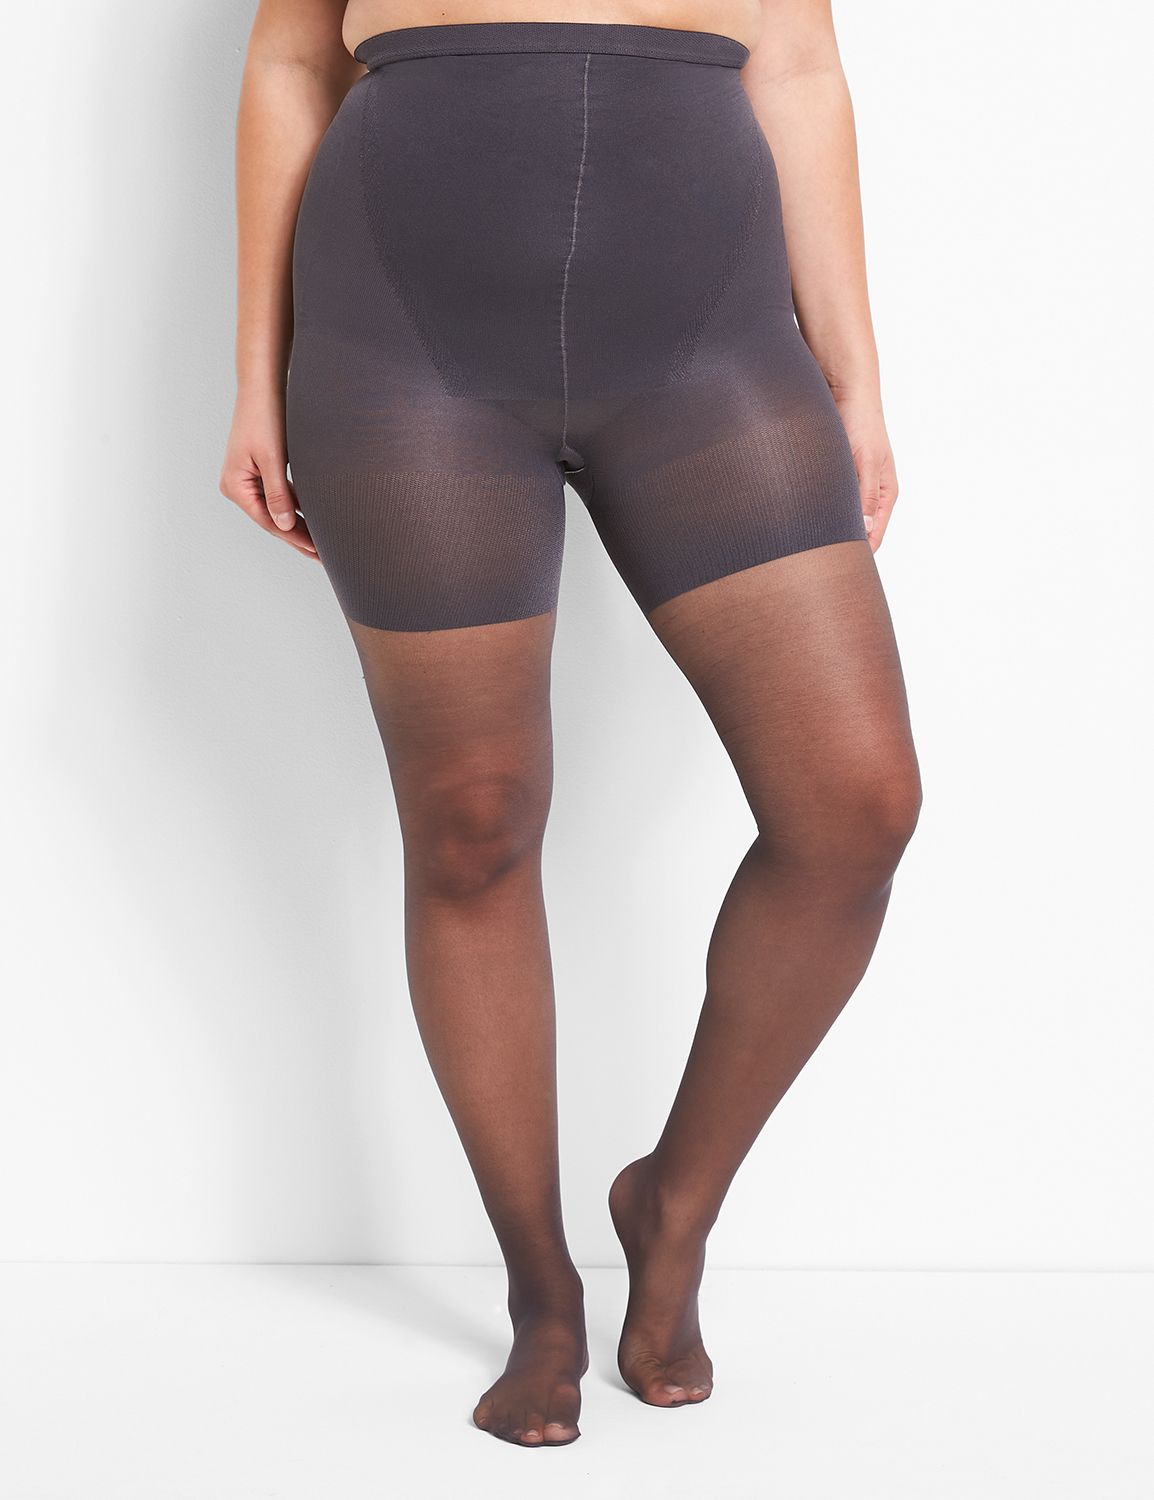 File:Sheer tights or pantyhose with high waist control top and